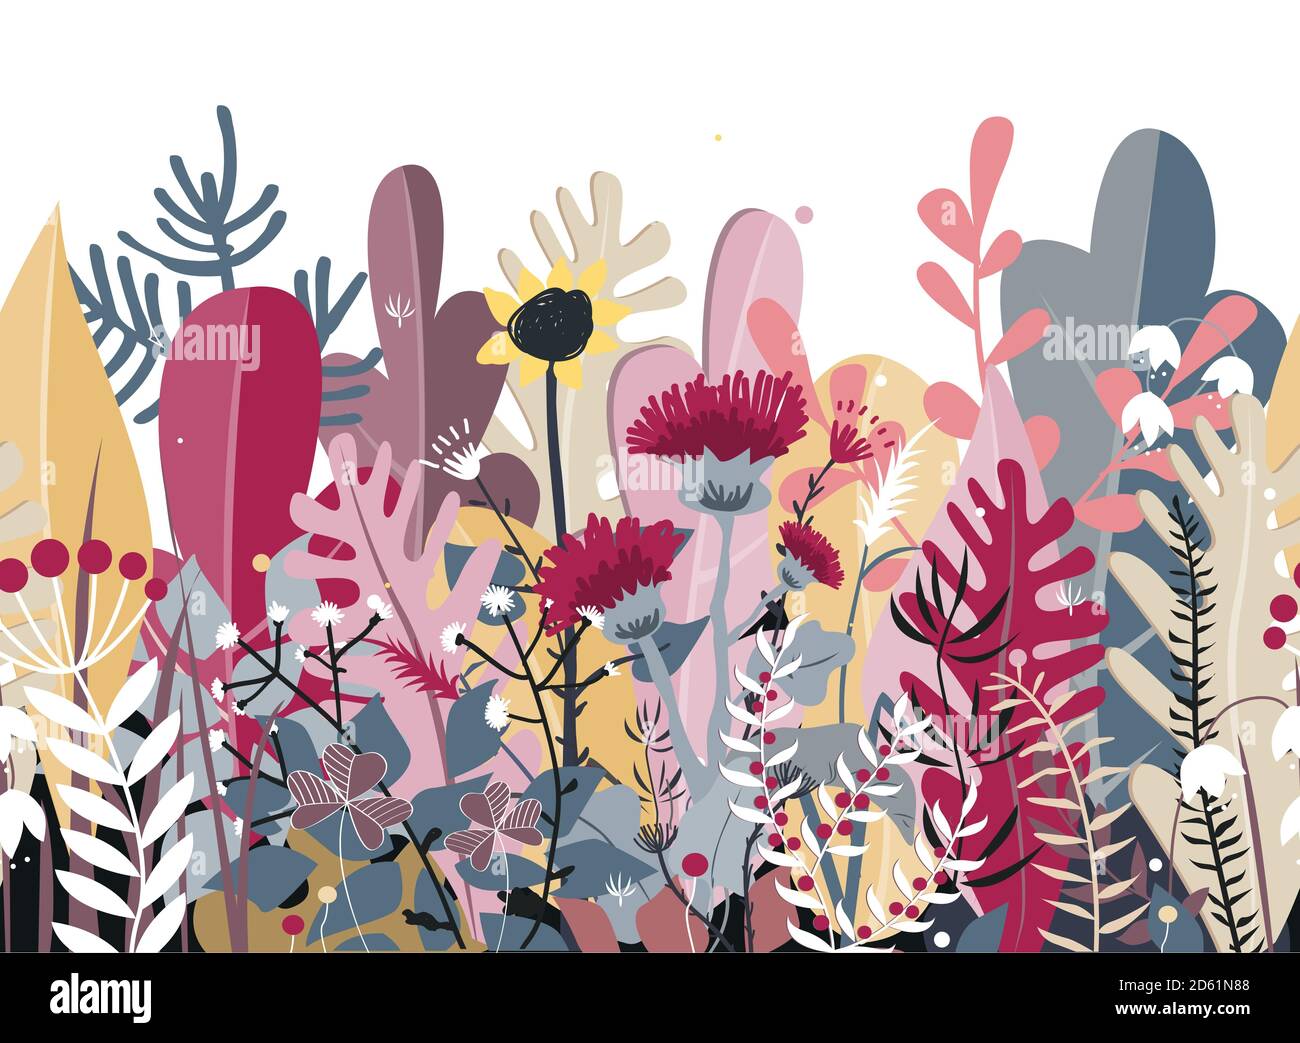 Doodle seamless background of stylized autumn flowers, leaves and trees for greeting cards, textile, or banners. Meadow or forest border Stock Vector